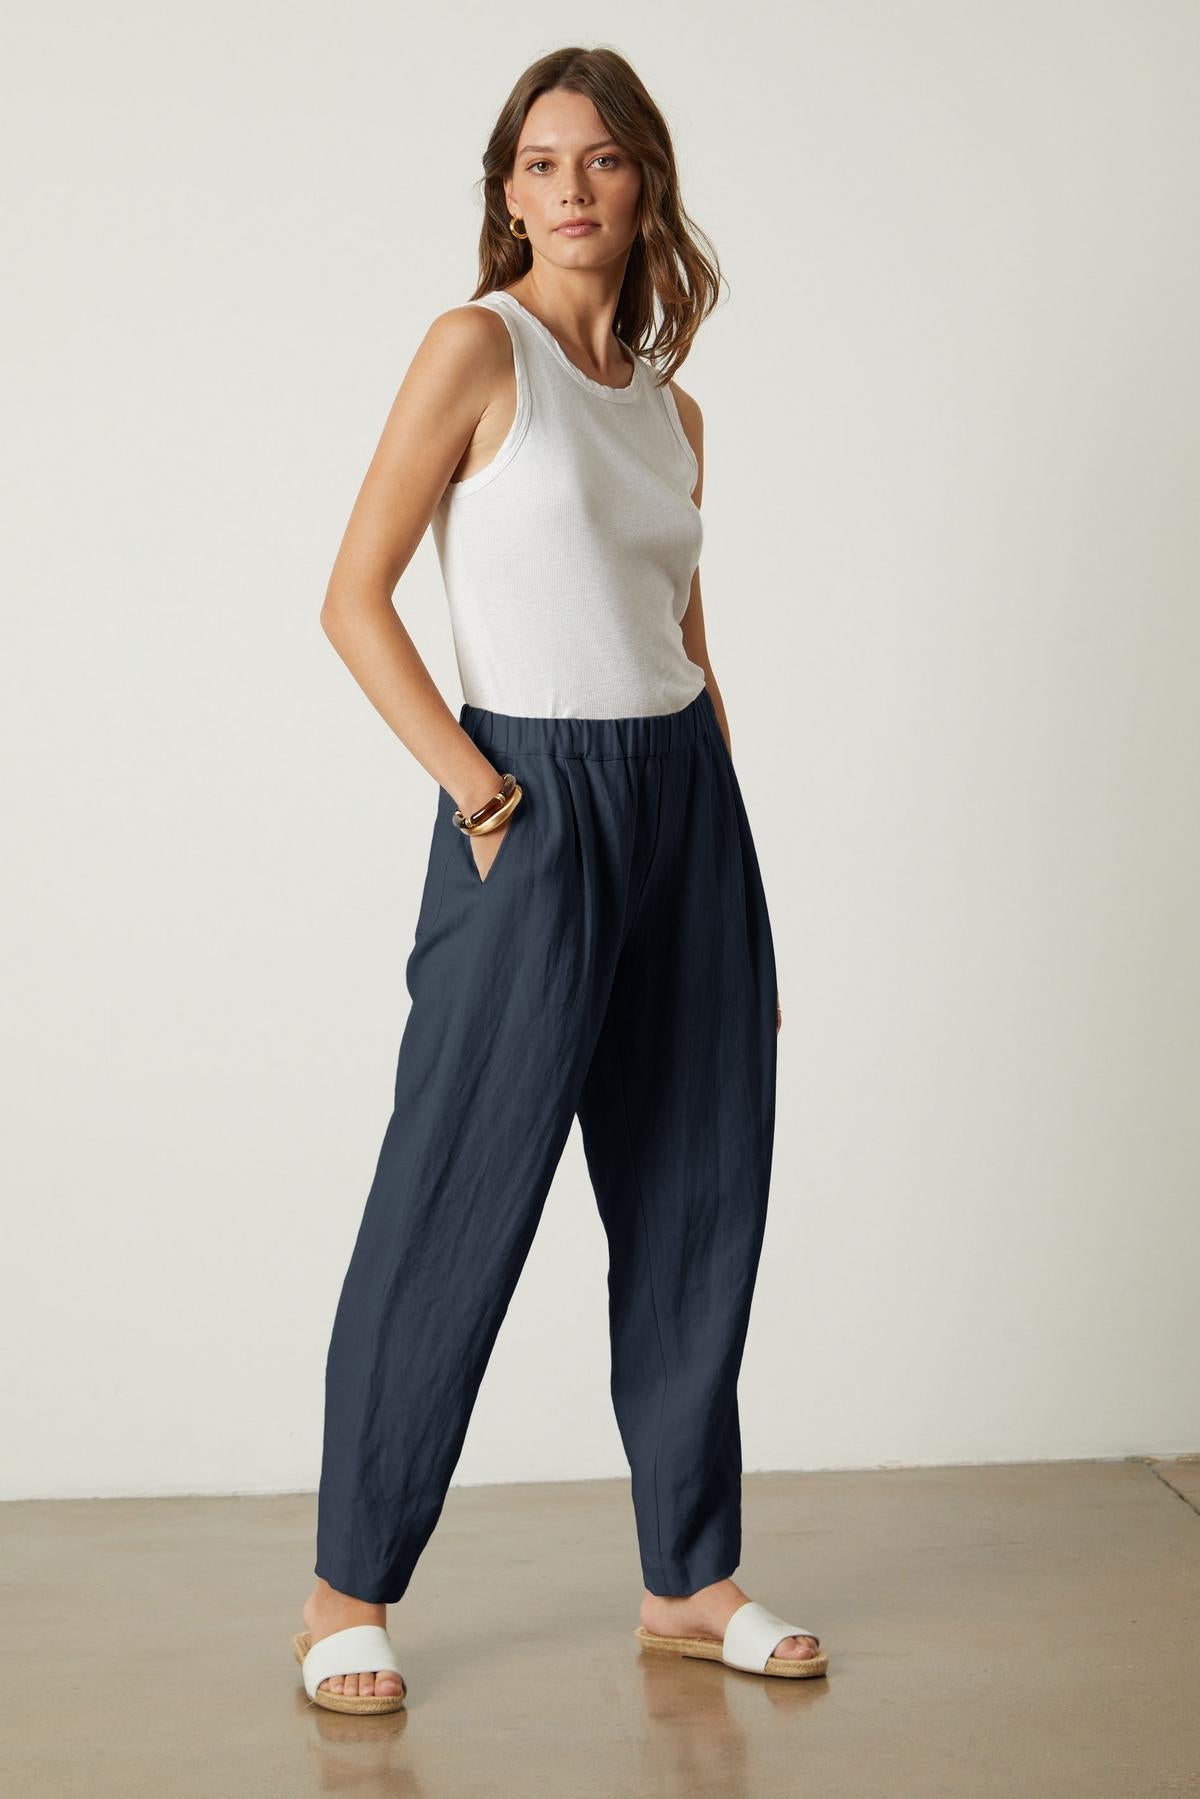   The model is wearing a white tank top and Velvet by Graham & Spencer navy linen trousers, showcasing the drape and texture of the lightweight fabric of the JESSIE HEAVY LINEN PANT. 